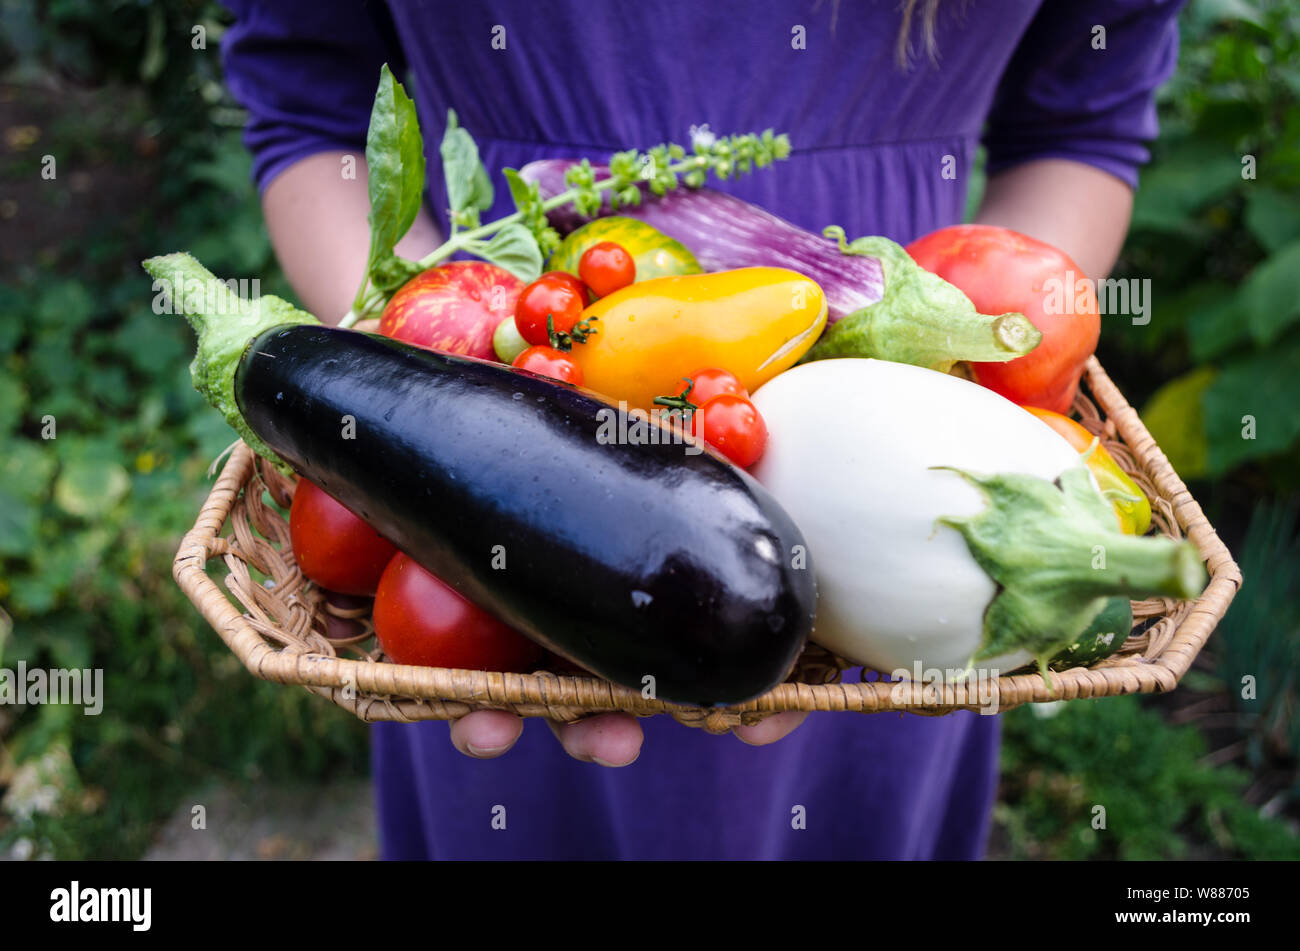 A girl is carrying freshly picked organic eco grown vegetables in the garden. Organic egglants or aubergines, different types of tomatoes and basil. Stock Photo